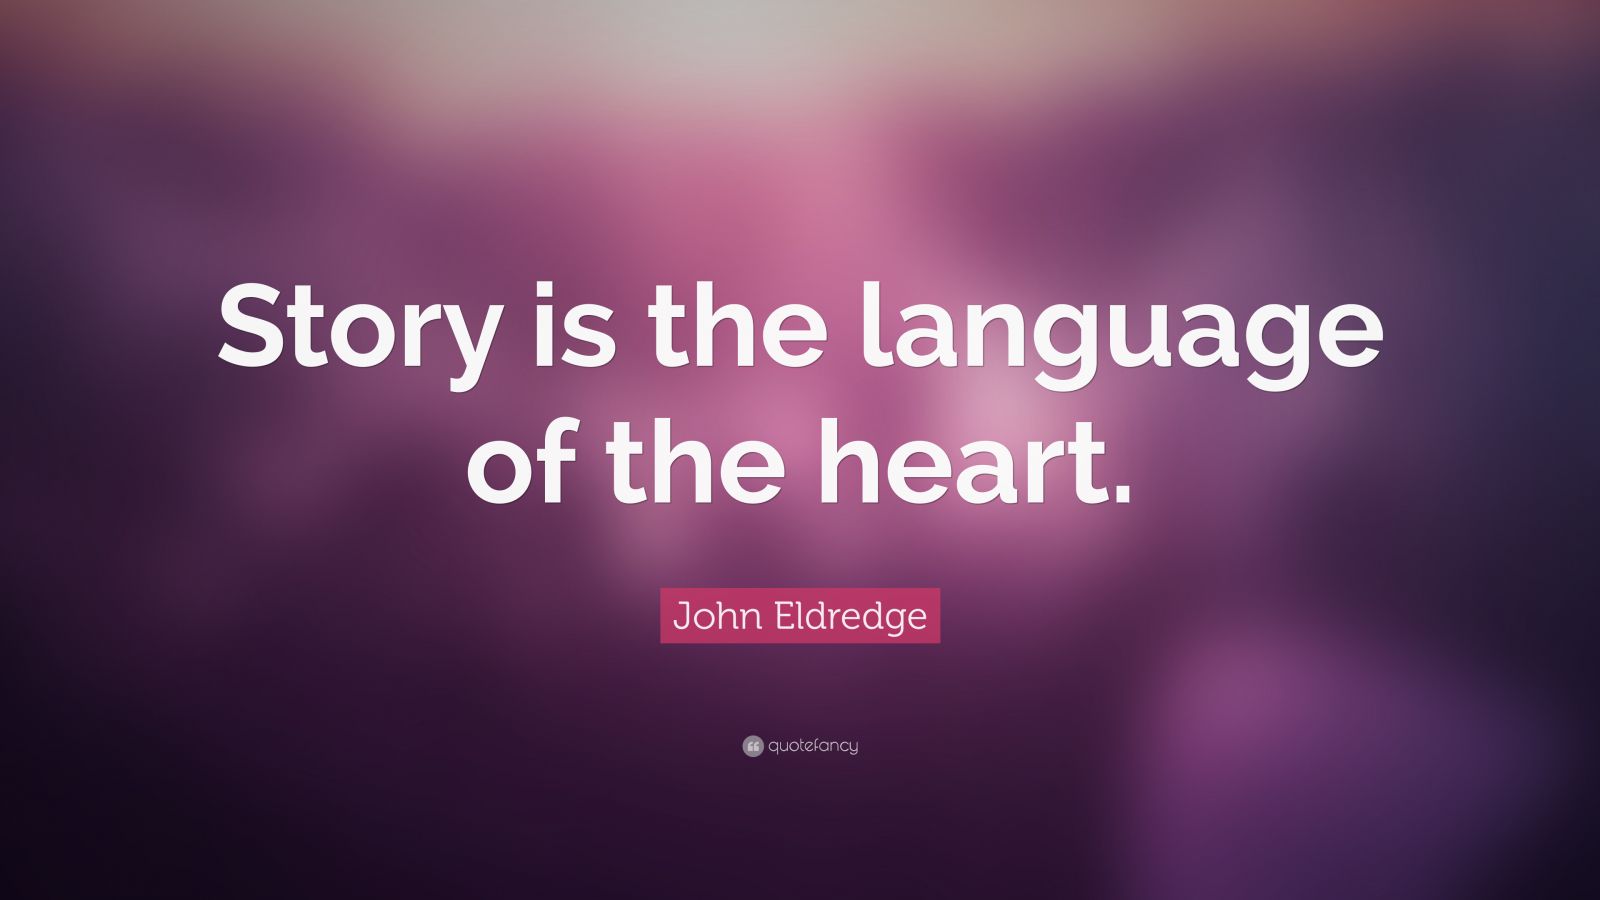 quotes from john eldredge wild at heart